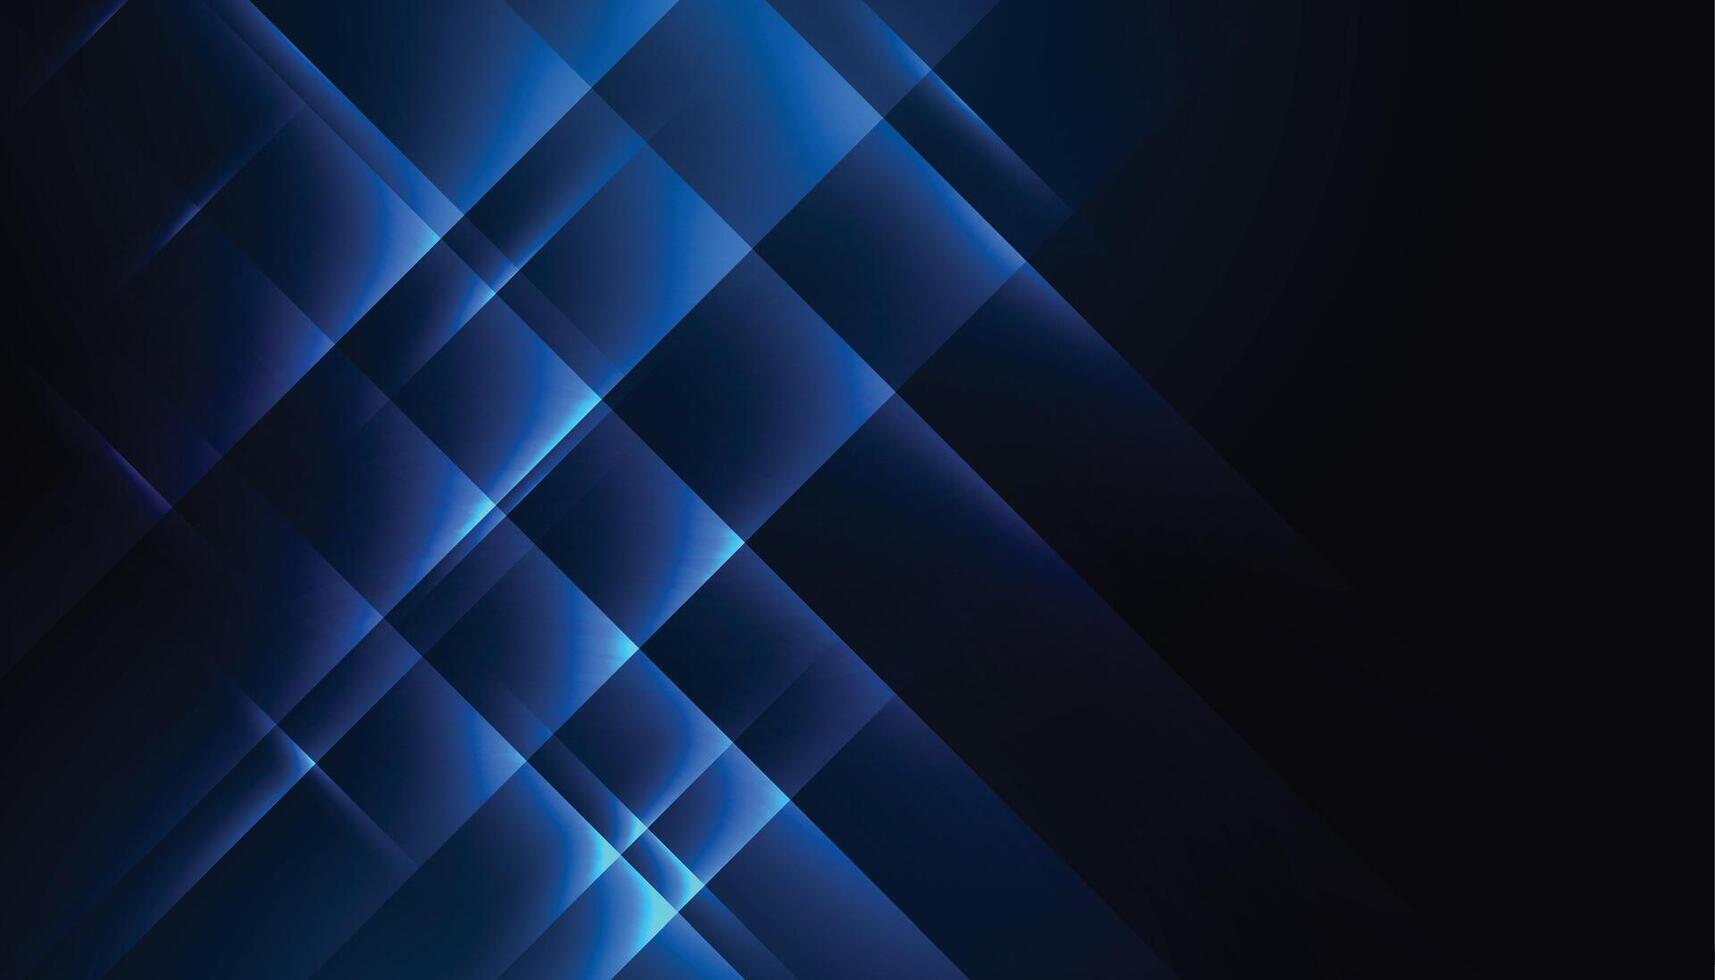 abstract and modern glowing lines and shapes wallpaper design vector